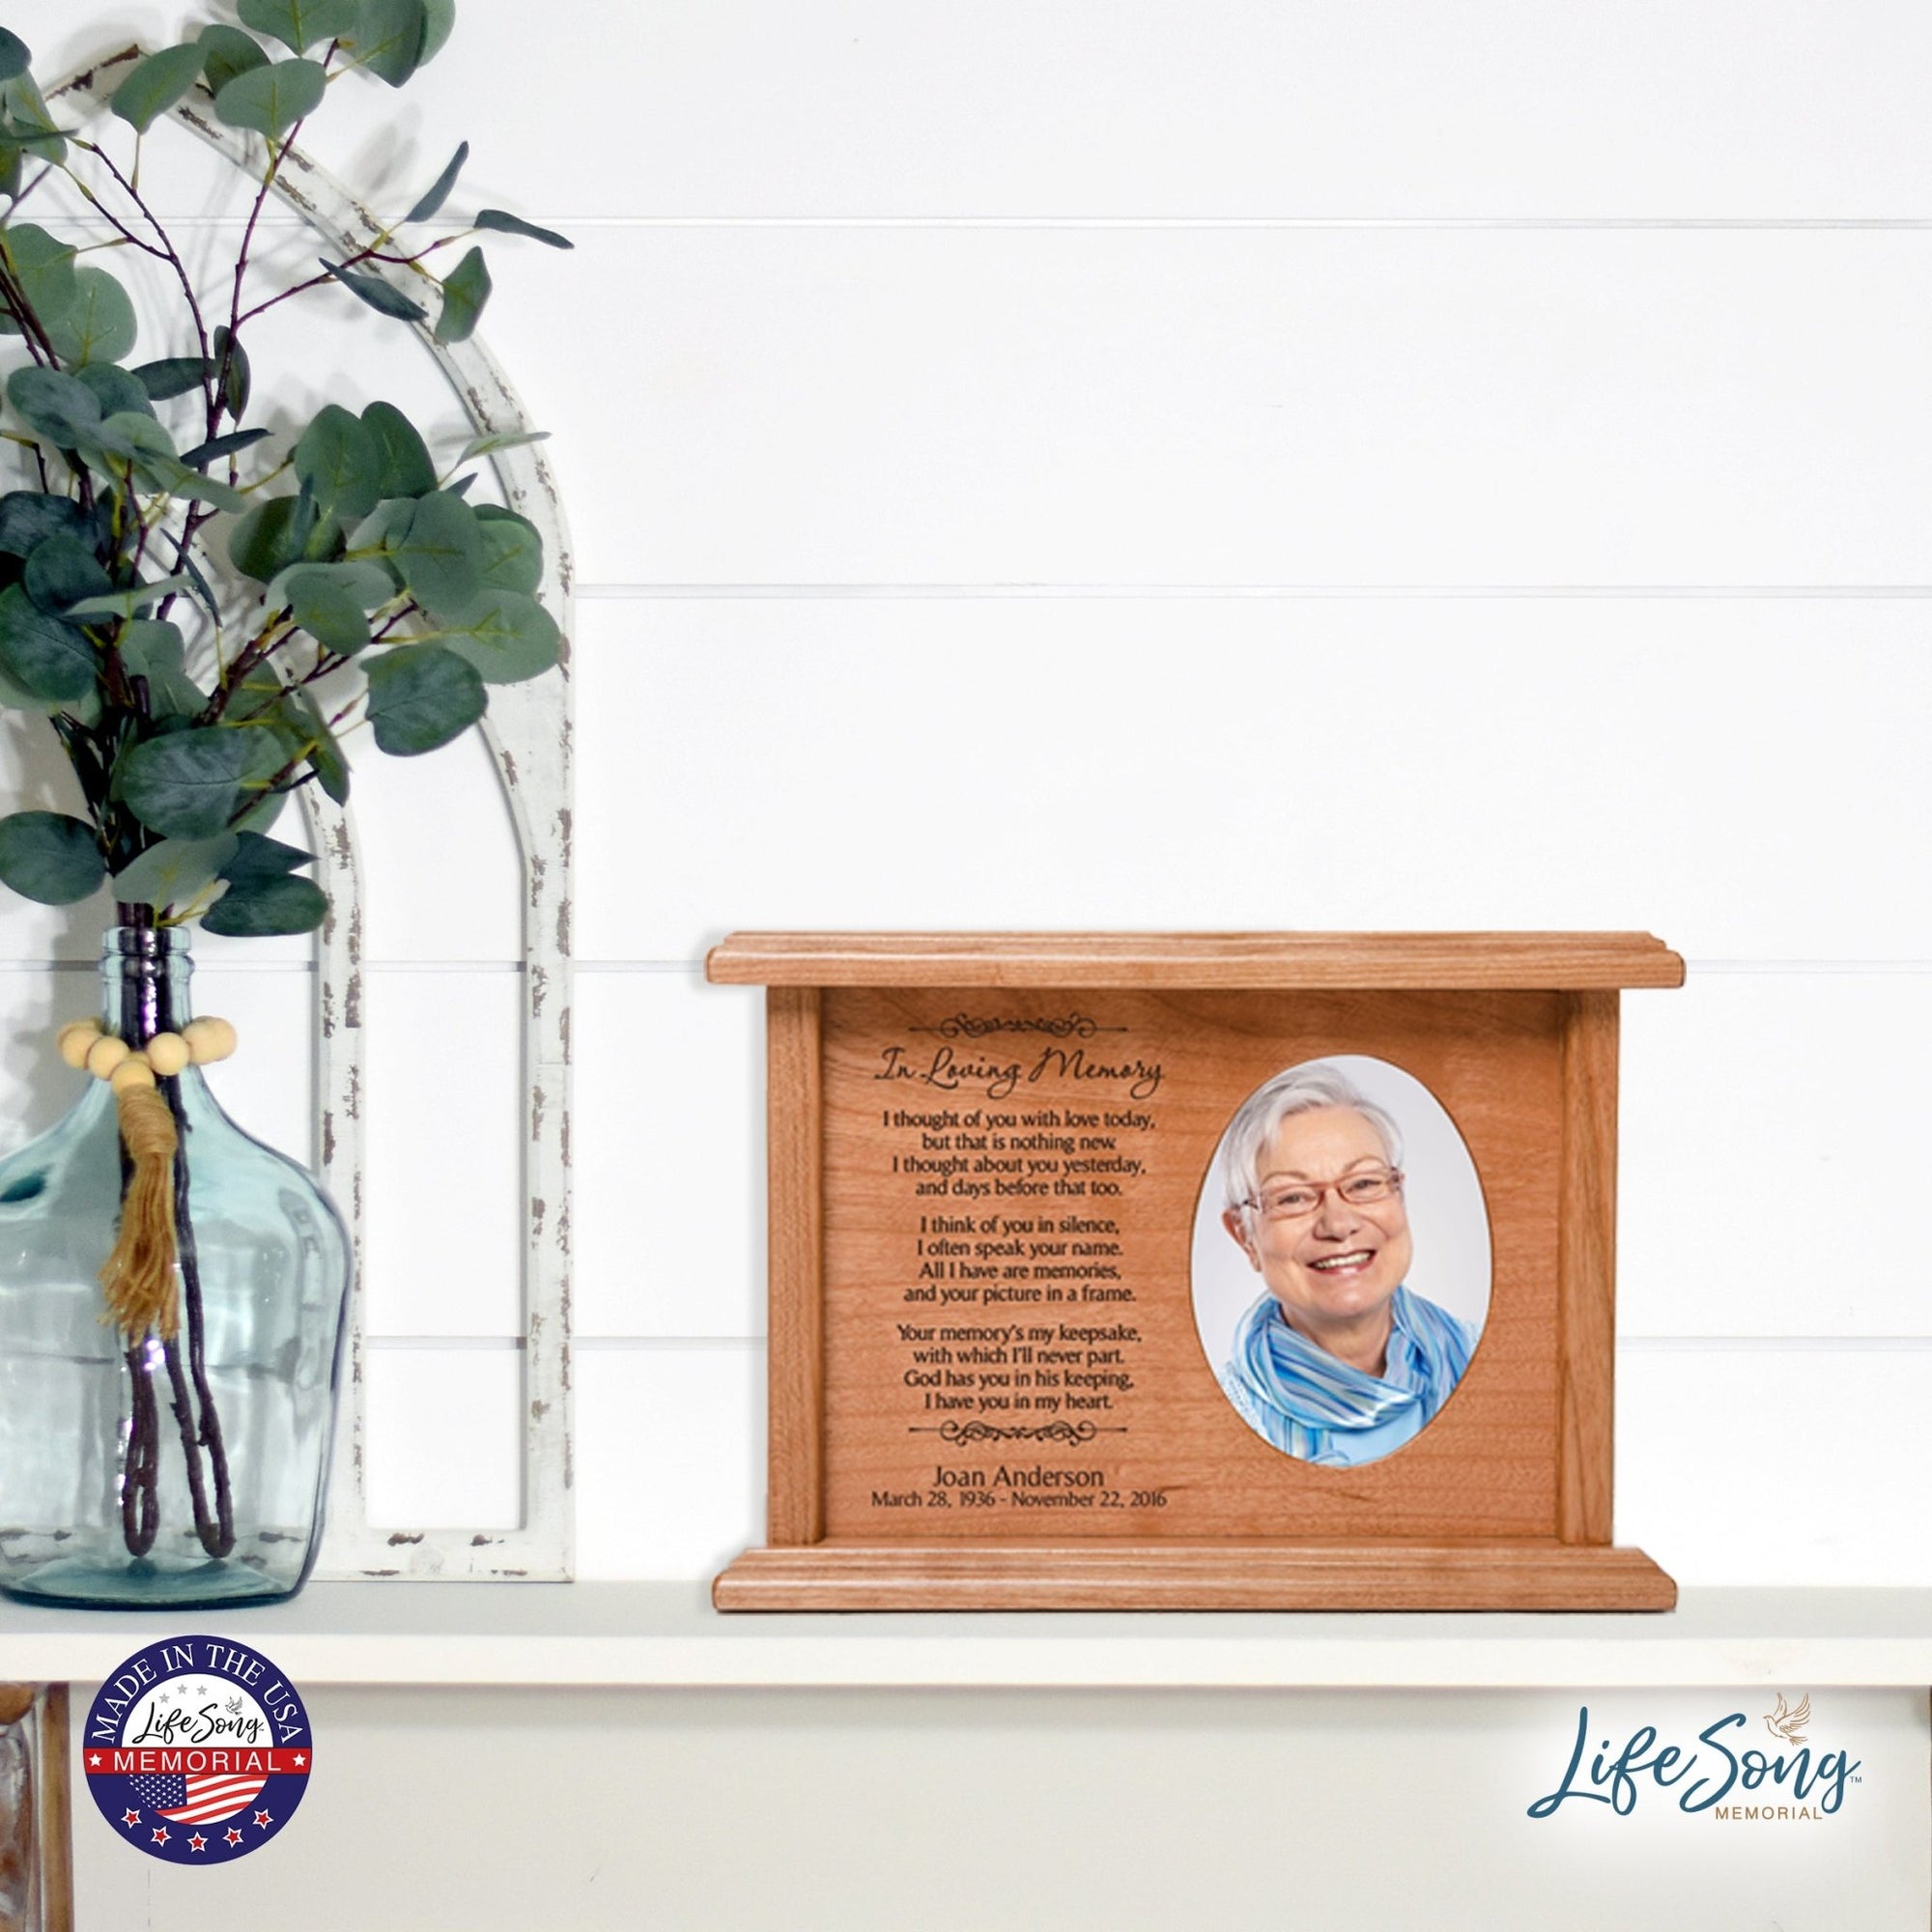 Custom Engraved 8.75x4 Memorial Cremation Keepsake Urn Box Holds 65 Cu Inches Of Human Ashes and 2x3 Photo - In Loving Memory - LifeSong Milestones